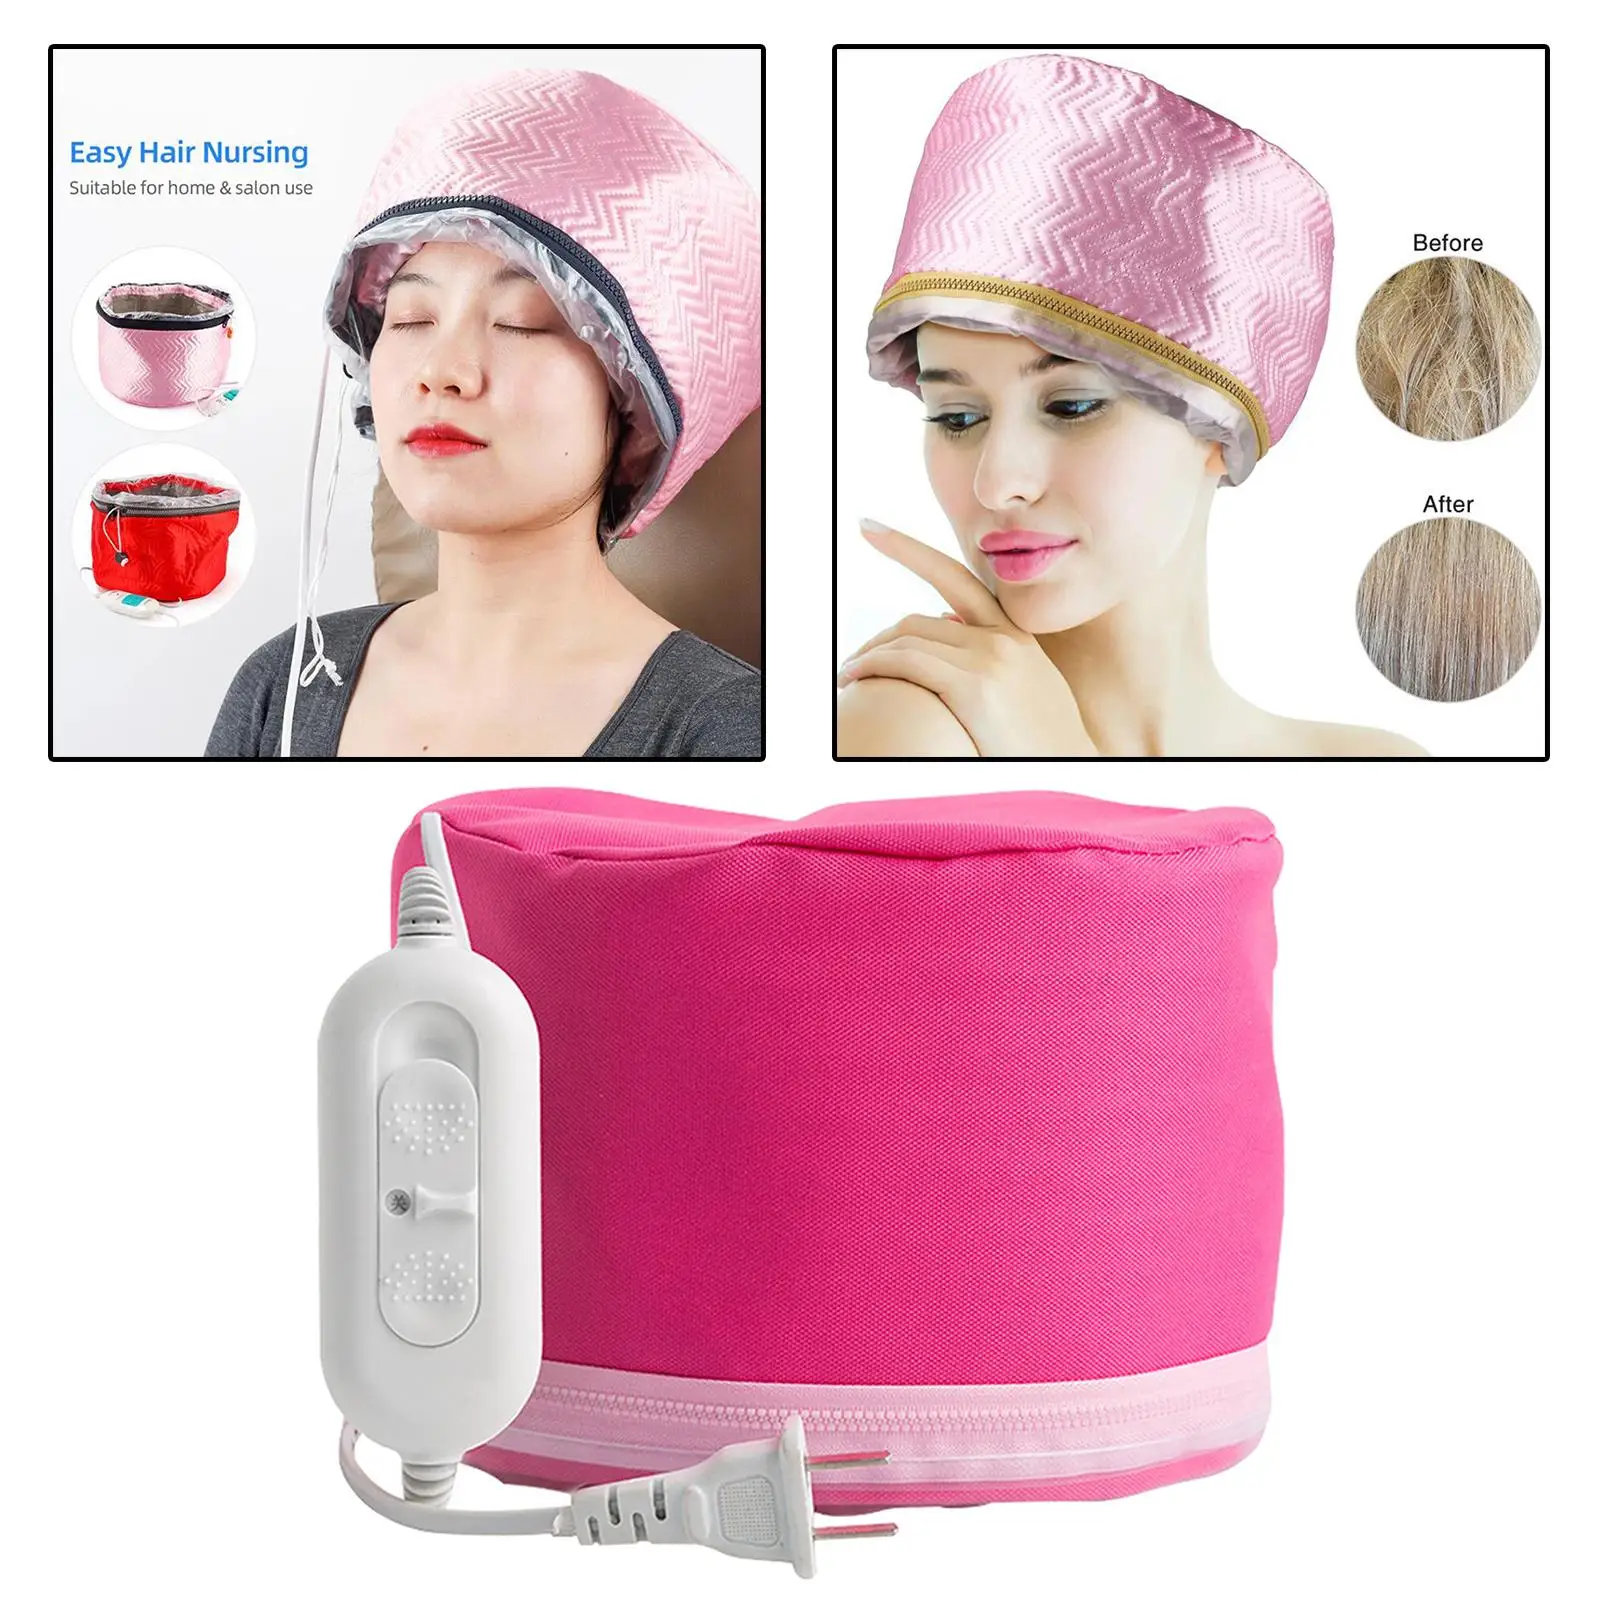 Hair Heating Caps Steamer 3 Adjustable Size ,Electric Microwave  ,Thermal Heat Caps Hair Steamer for  Curling 